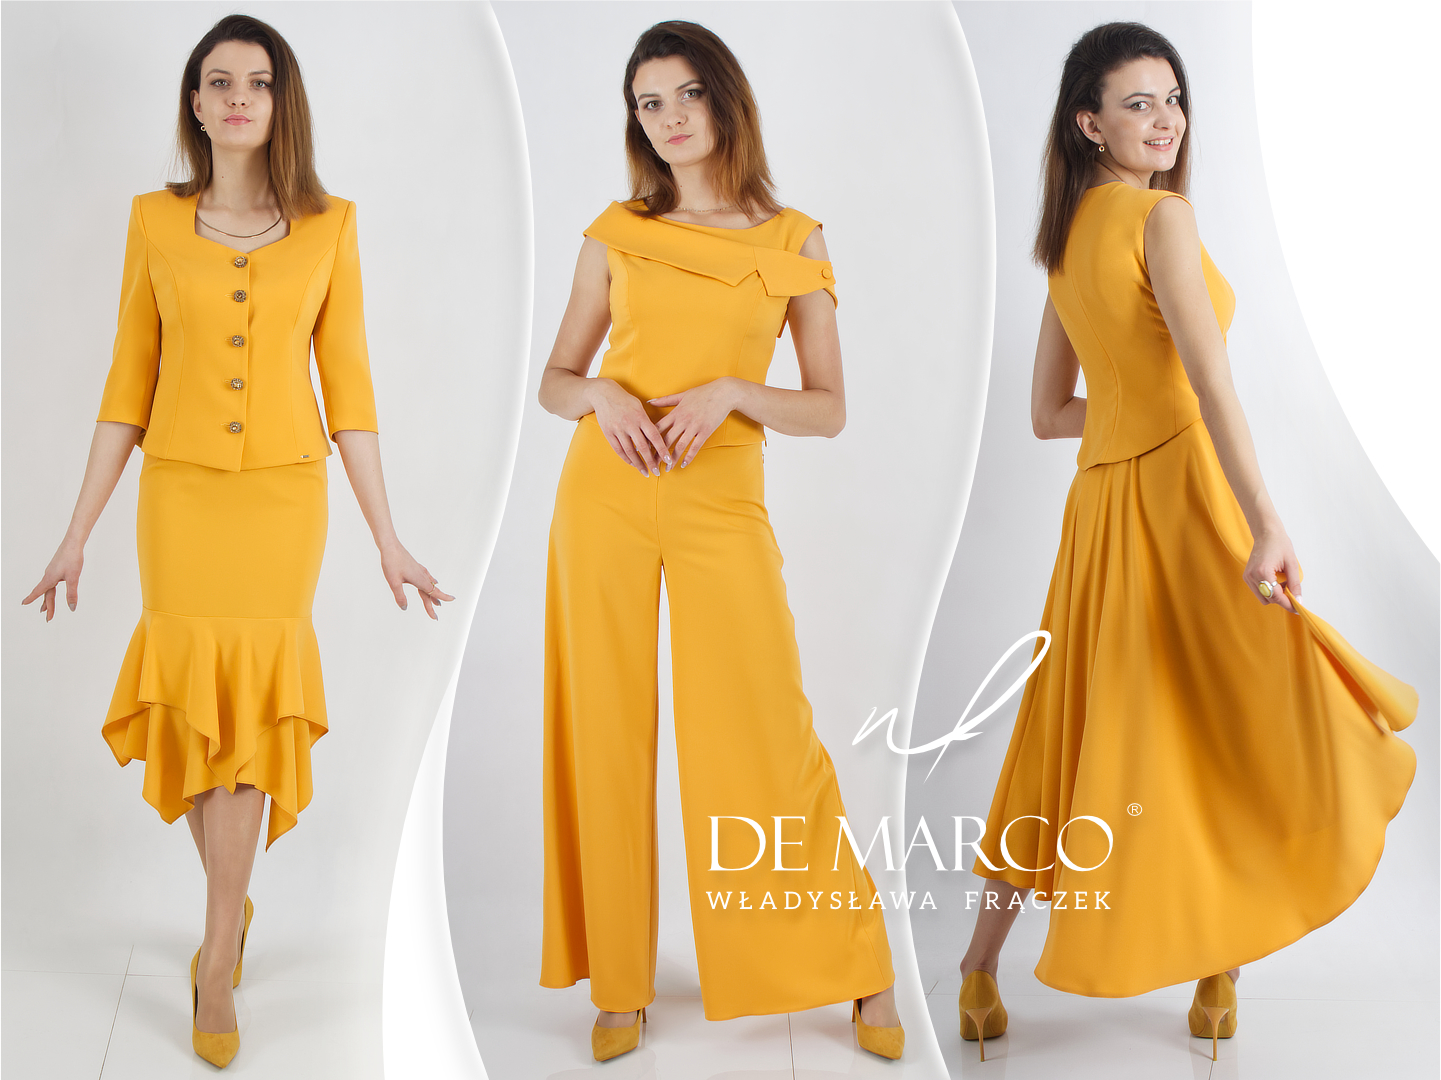 The most fashionable colours for autumn: mustard, honey, or ochre! Elegant styles from De Marco